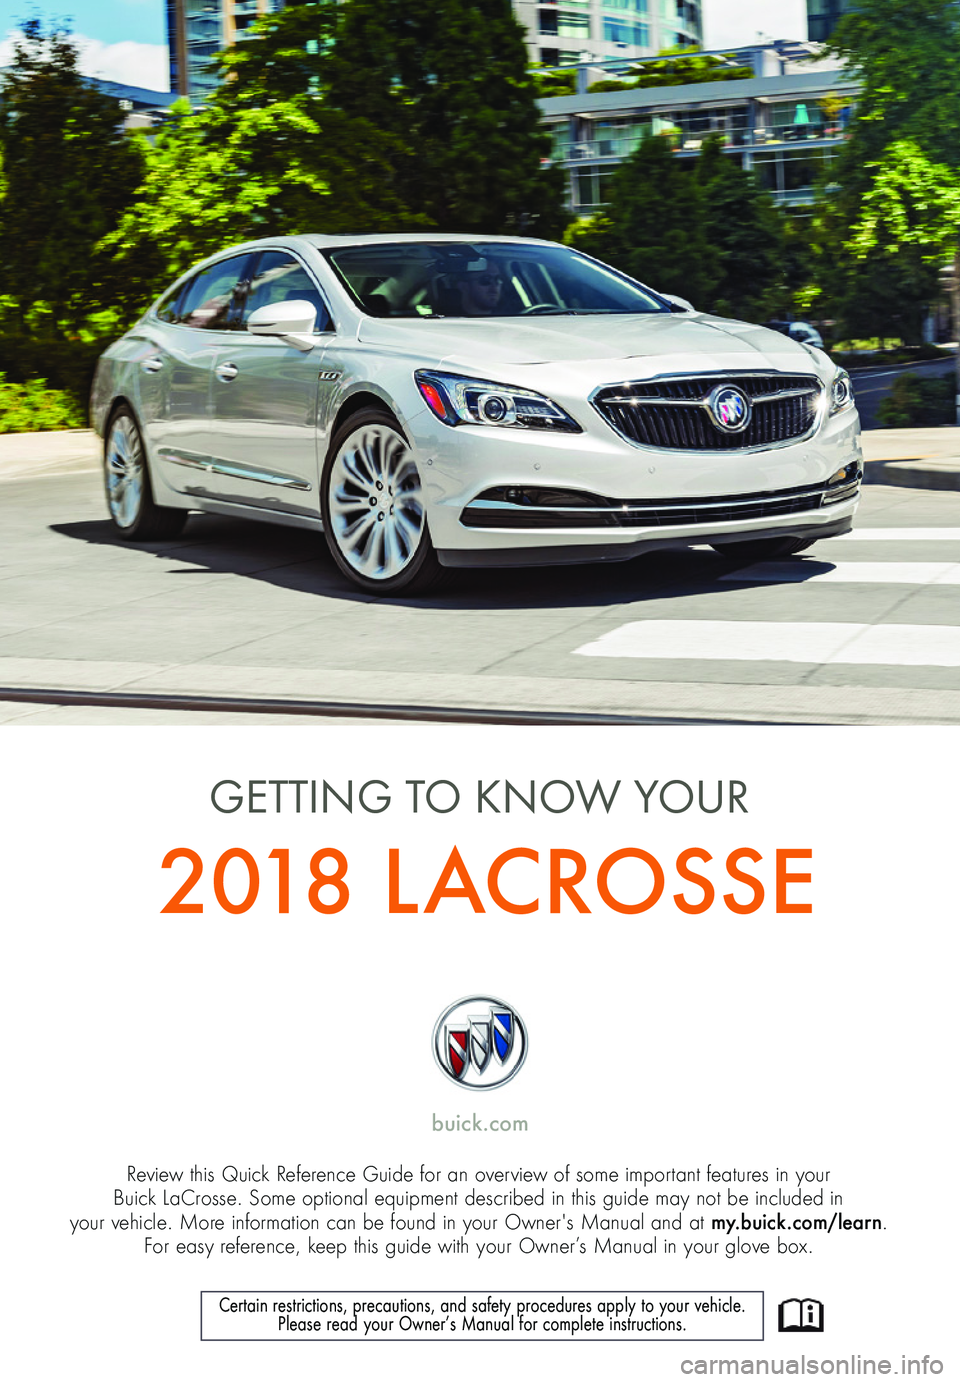 BUICK LACROSSE 2018  Get To Know Guide 1
Review this Quick Reference Guide for an overview of some important features in your  Buick LaCrosse. Some optional equipment described in this guide may not be included in  your vehicle. More infor